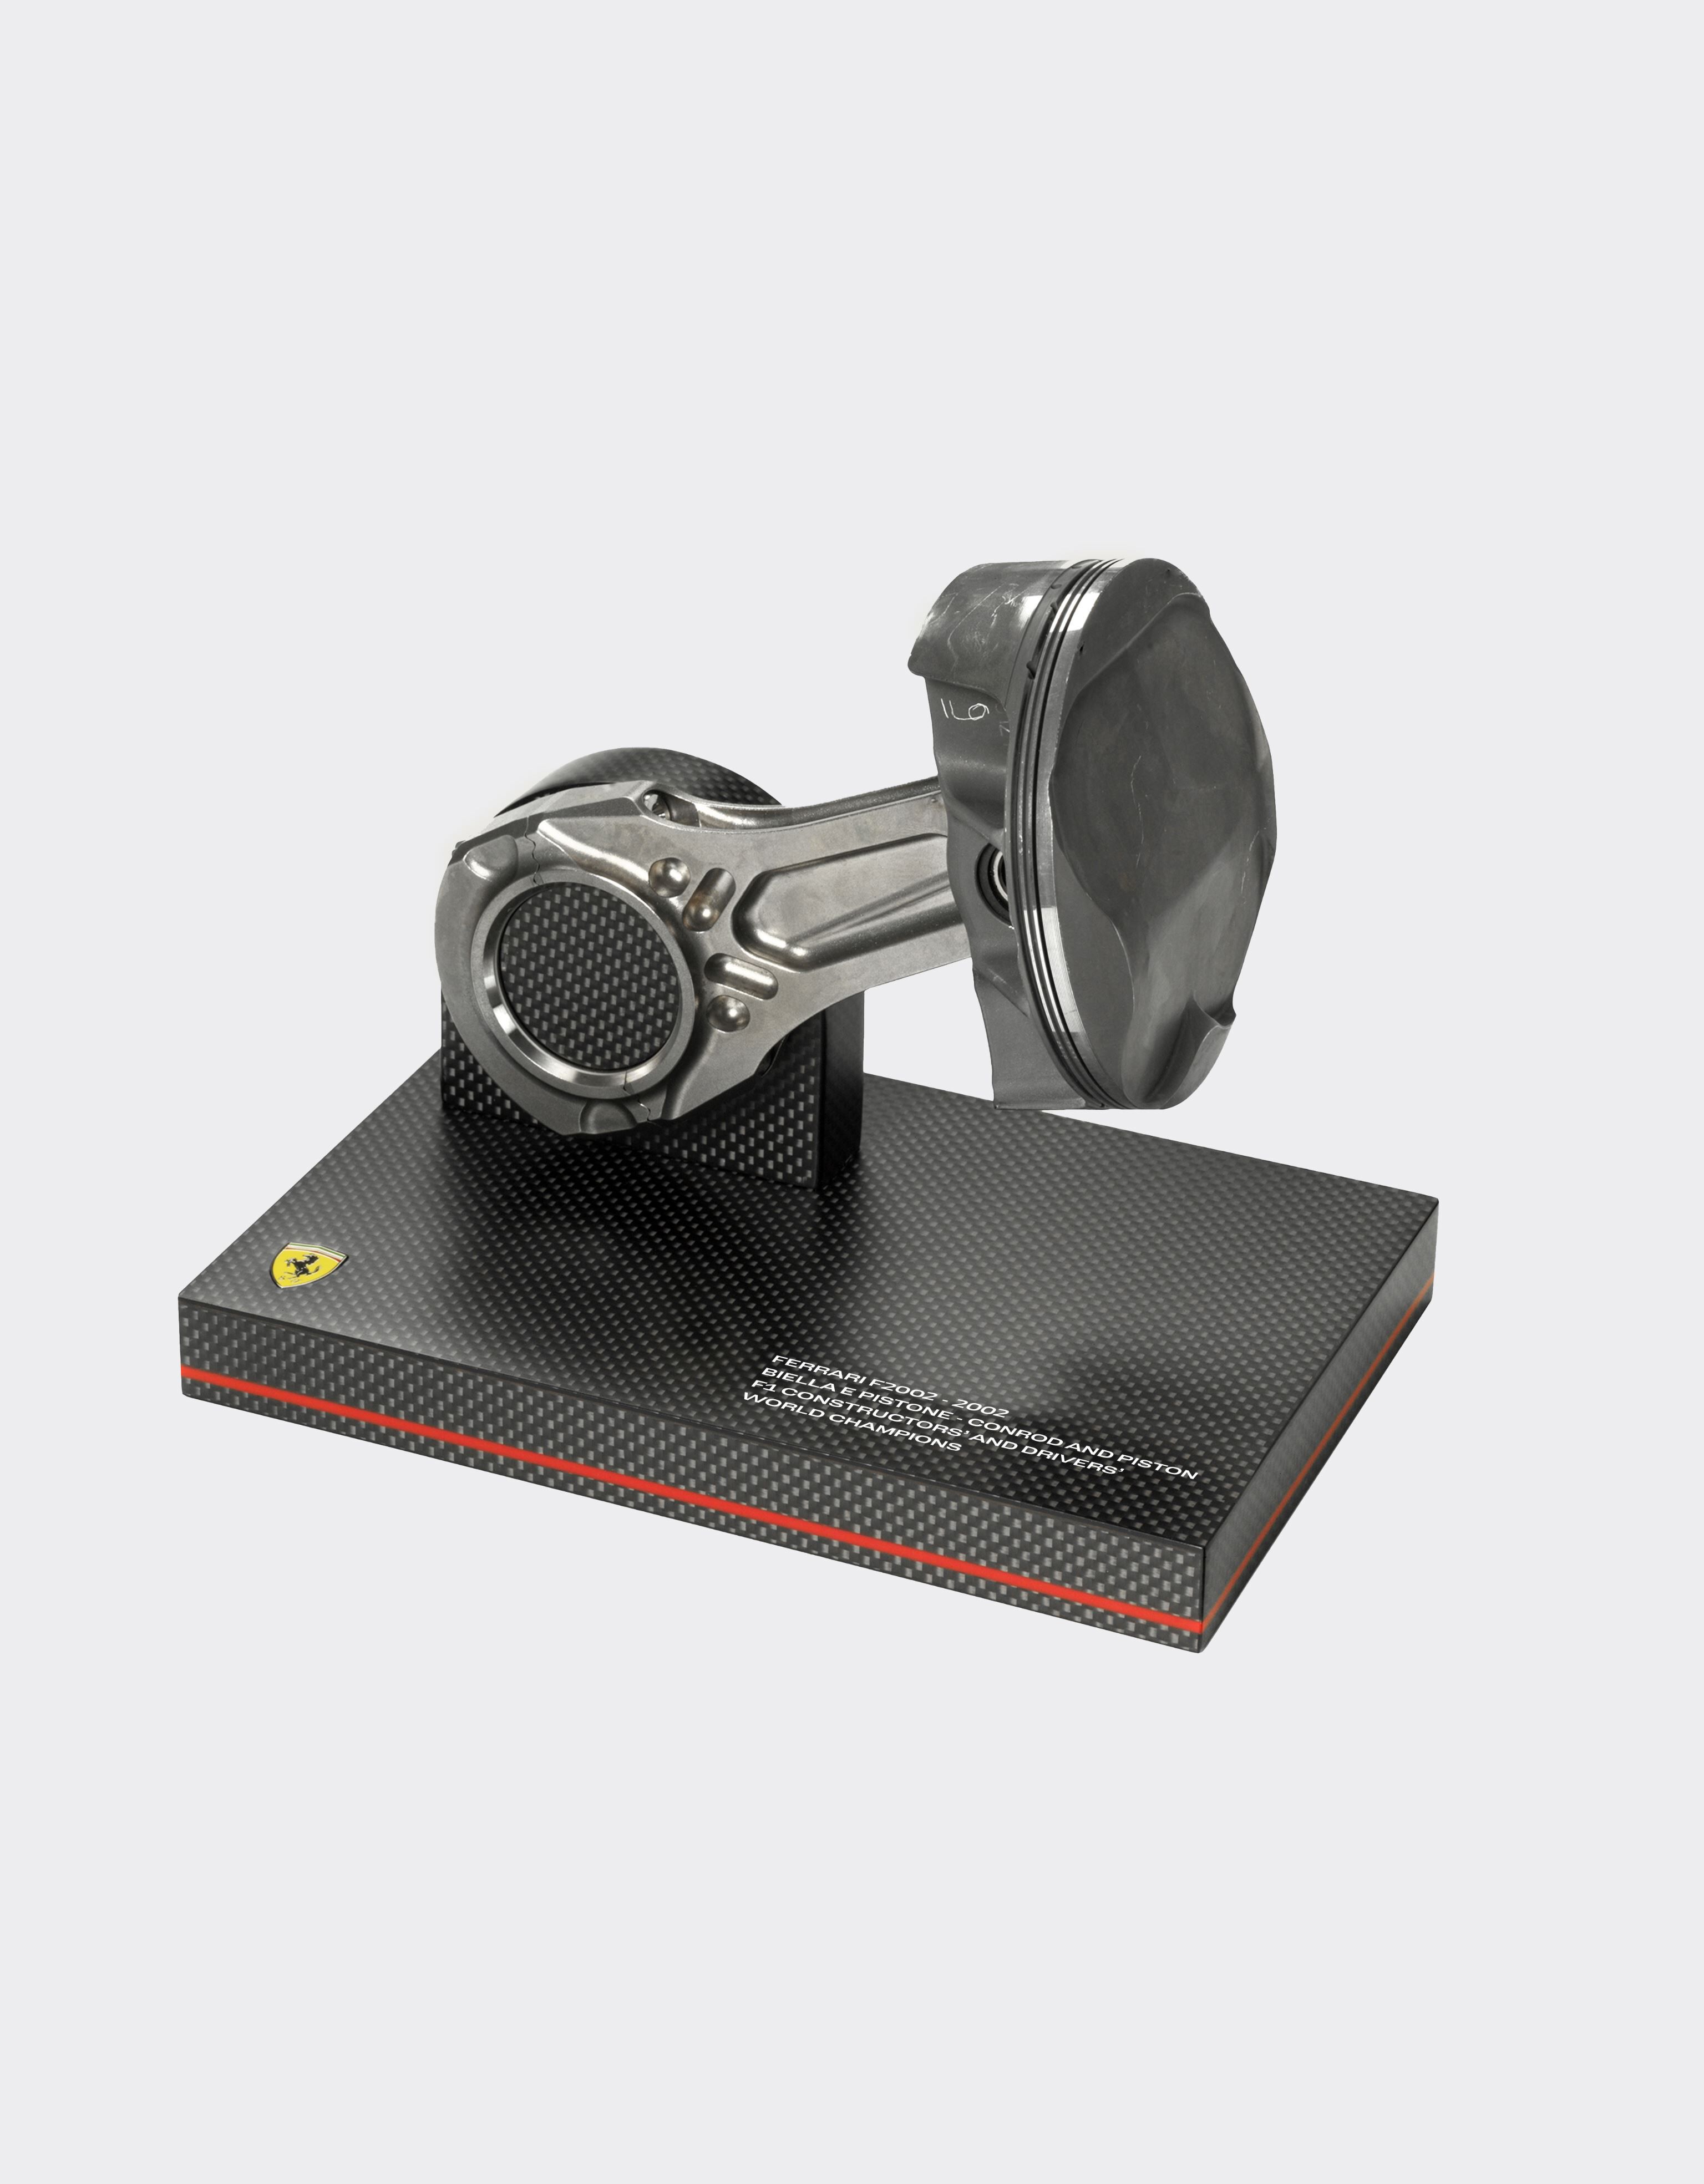 Ferrari Original connecting rod and piston set from the F2002, winner of the 2002 Constructors’ and Drivers’ Championships Black 47916f